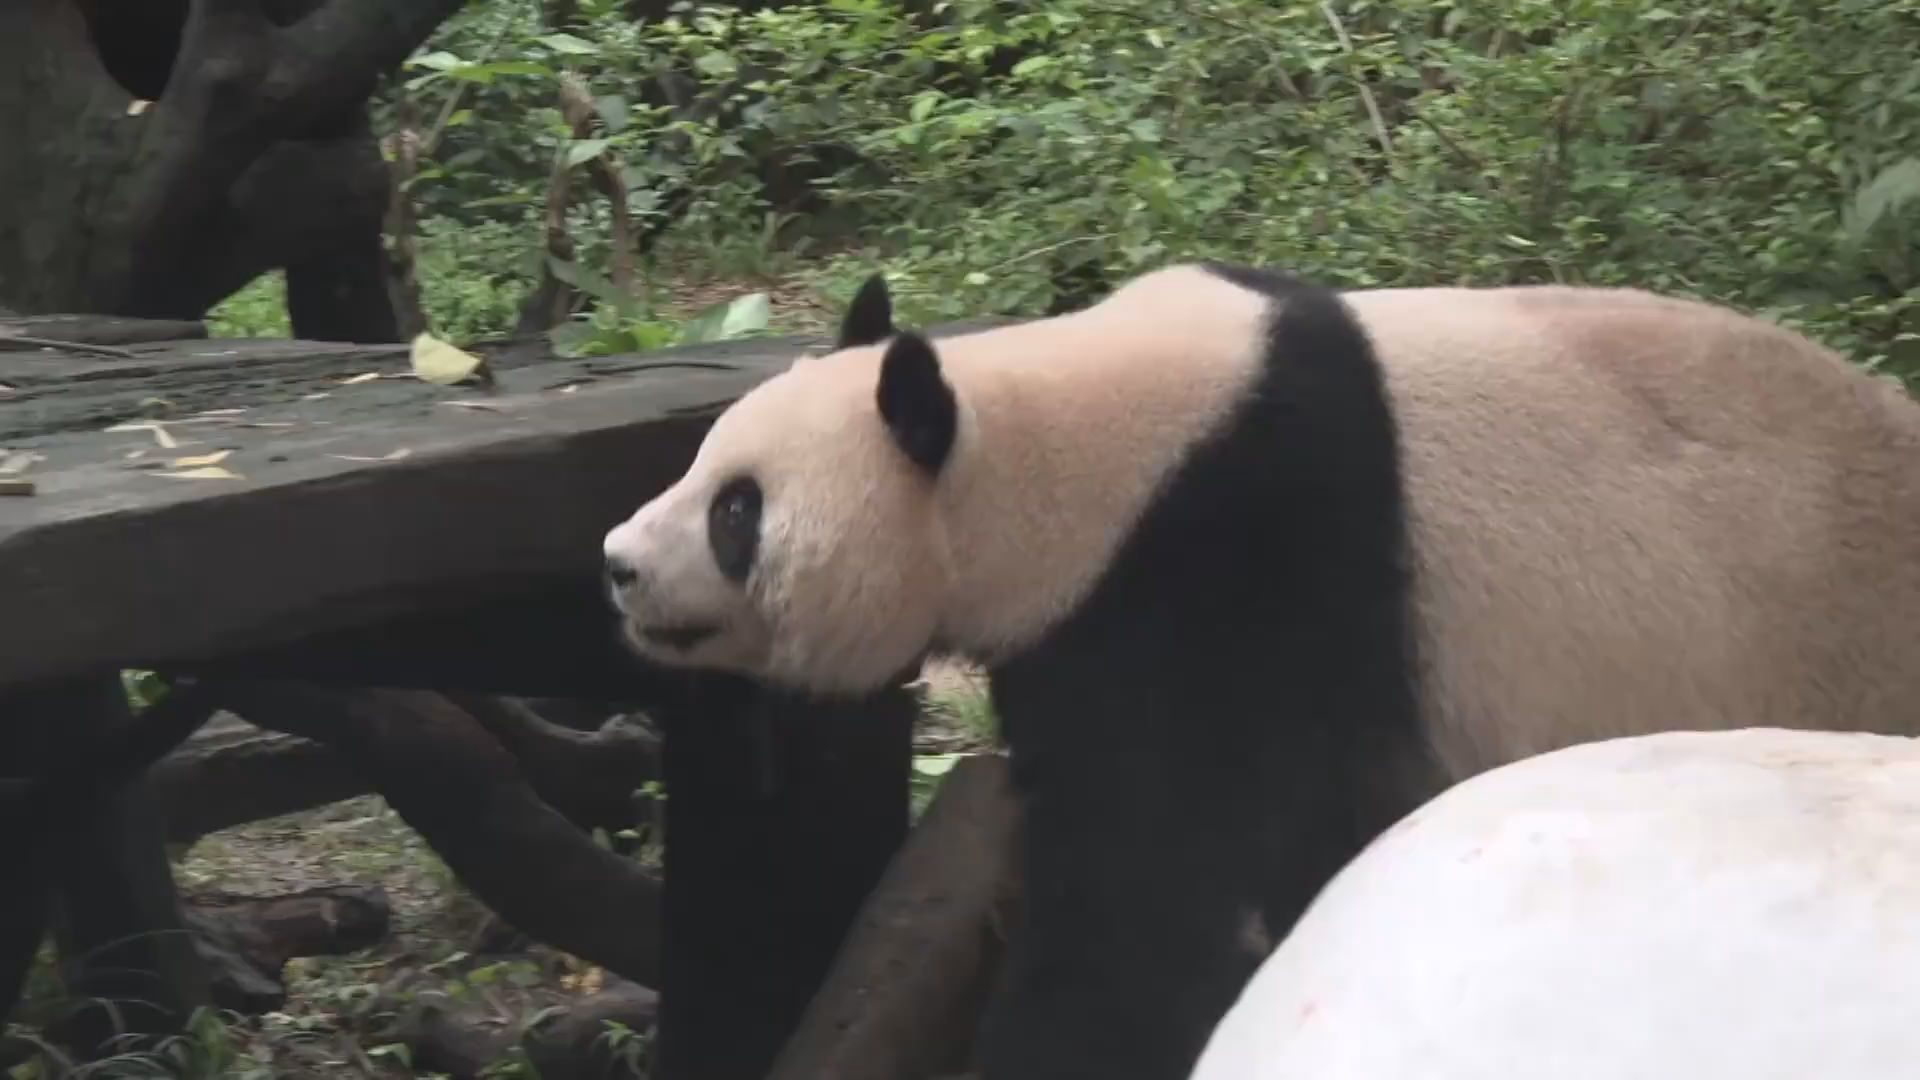  Giant pandas have their own dragon boats and dumplings